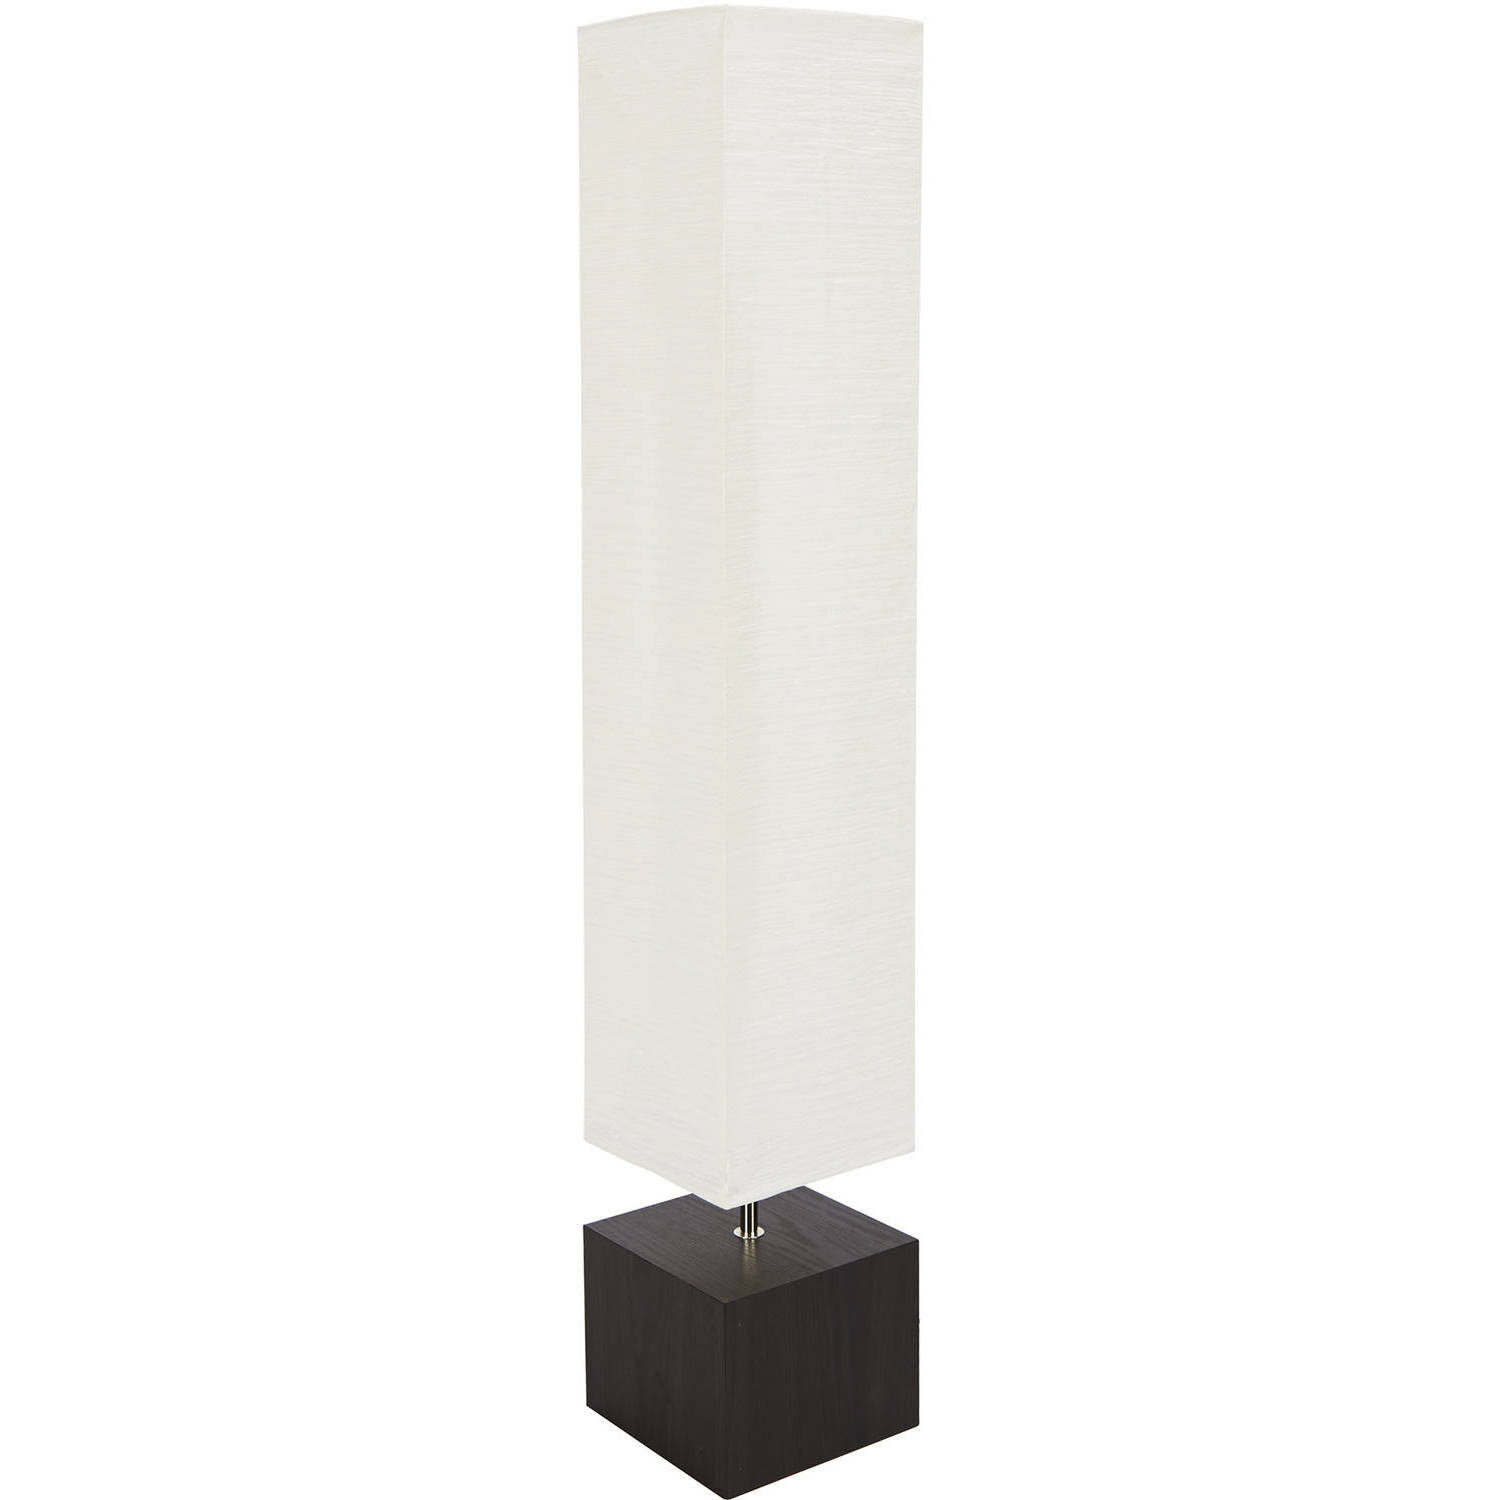 Mainstays White Rice Paper Floor Lamp With Dark Wood Base regarding proportions 1500 X 1500